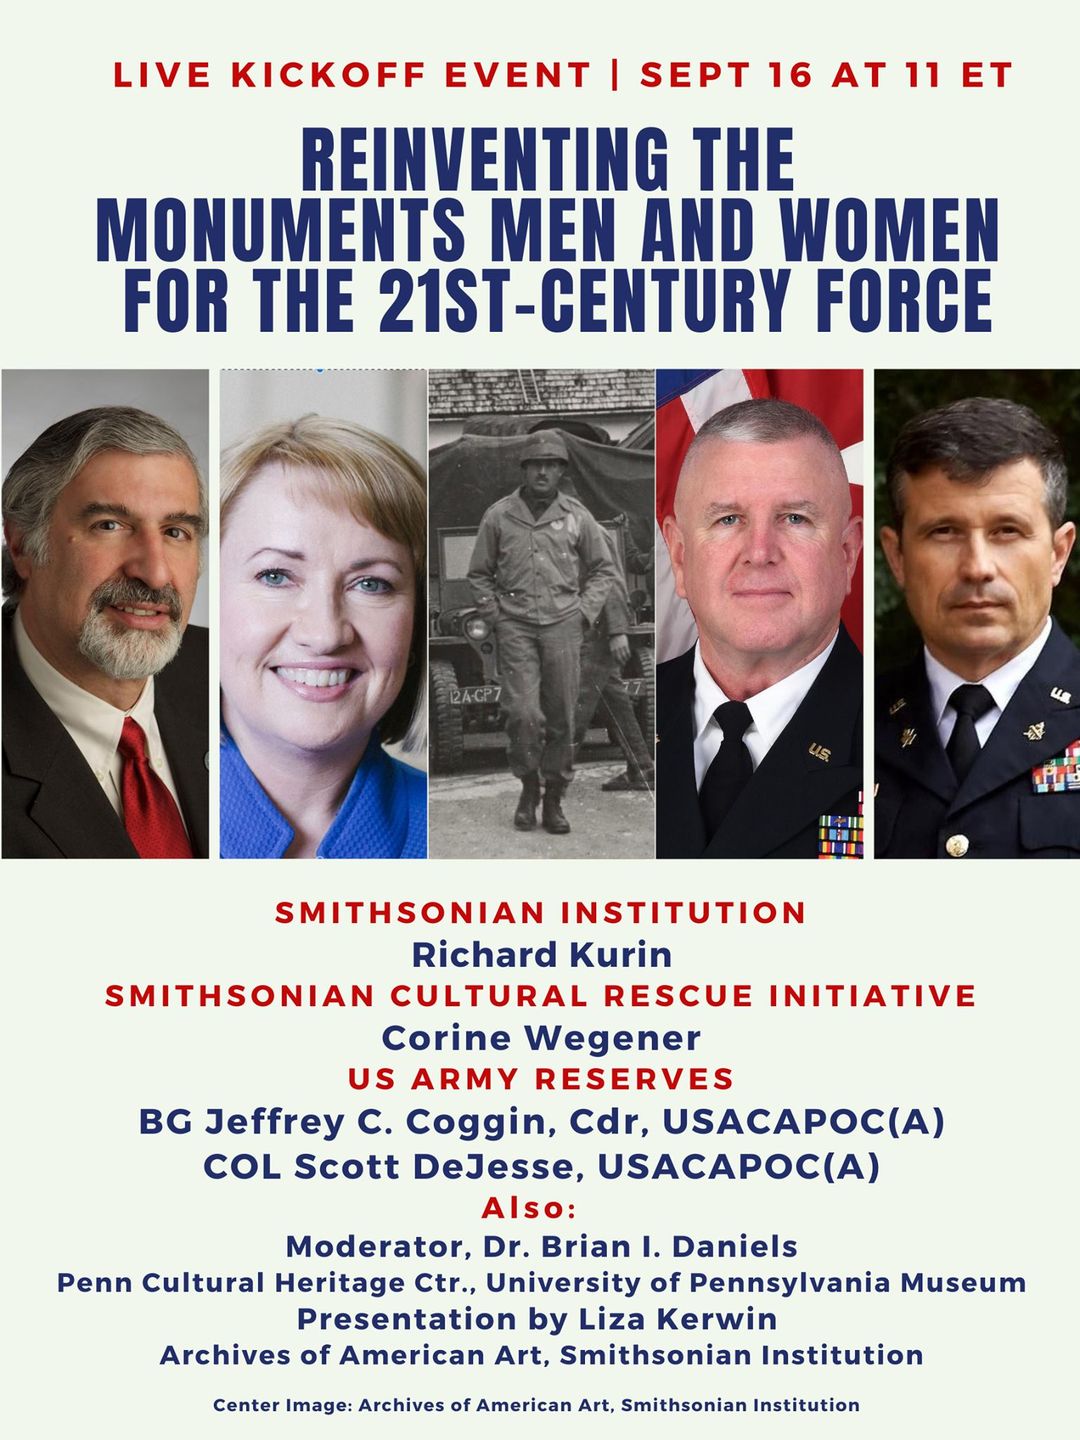 mounments men and women event flyer